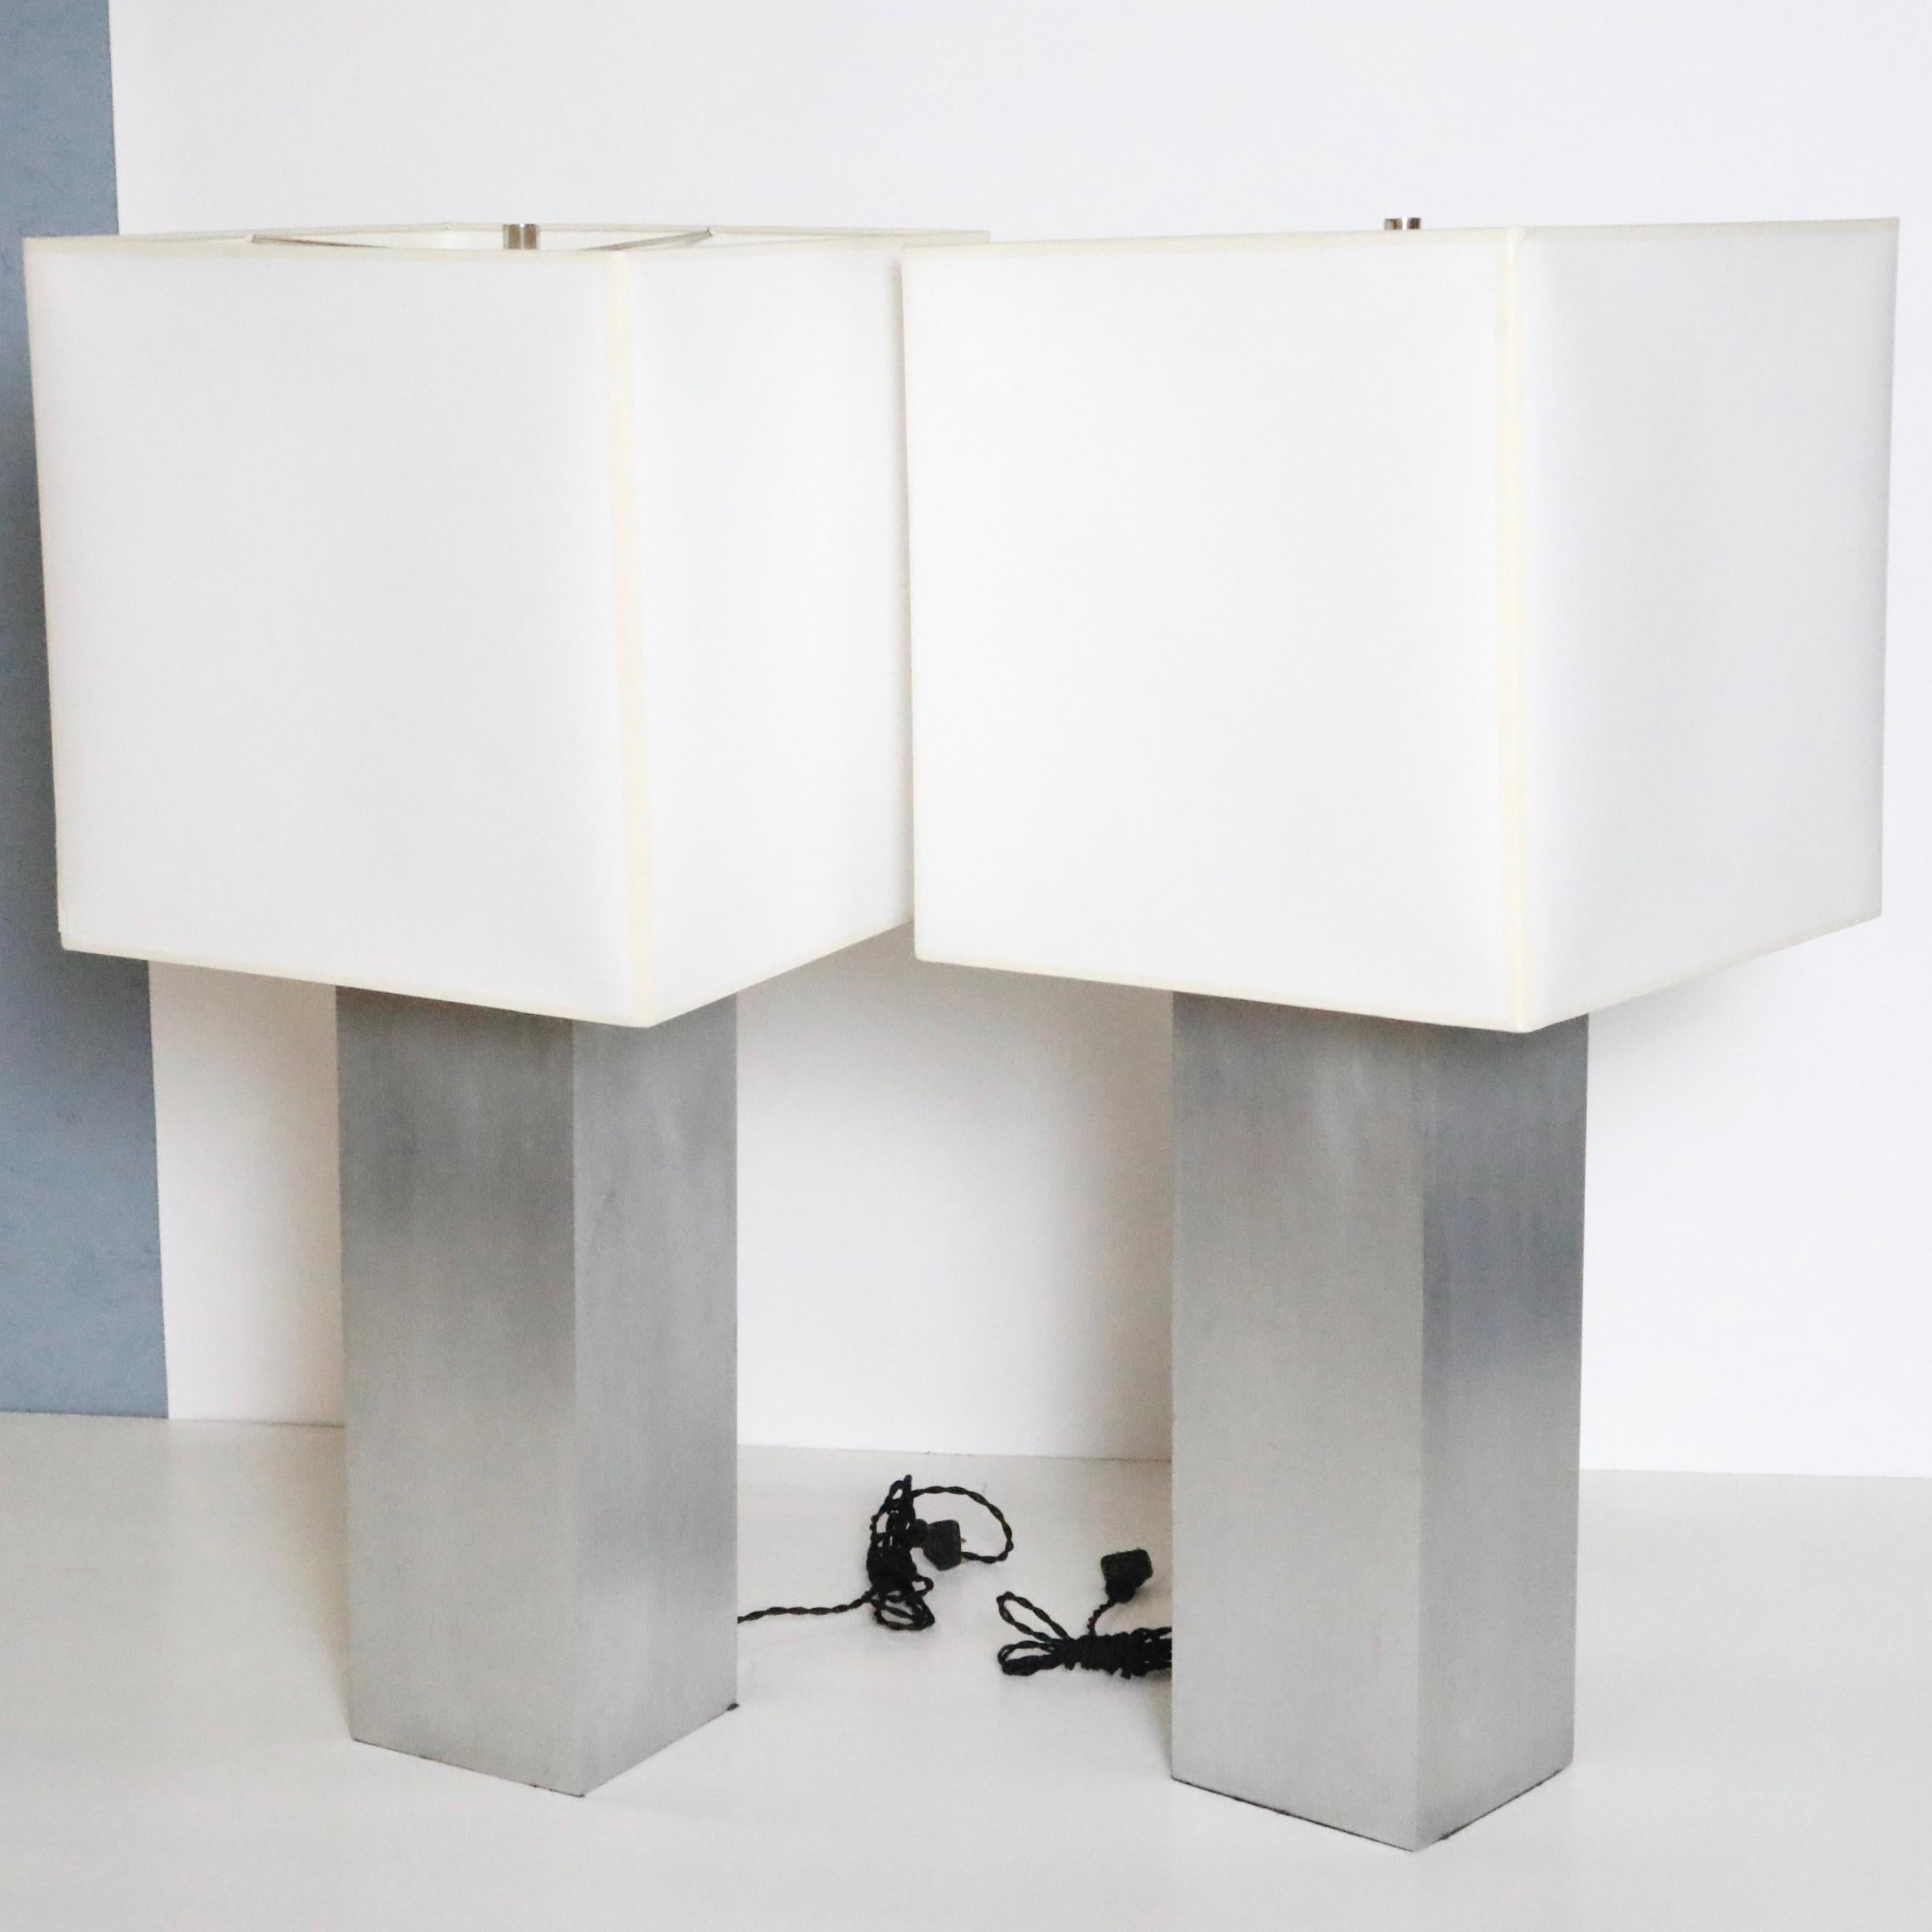 A Minimalist and clean-lined pair of vintage table lamps with a brushed metal rectangular base and custom off-white square-shaped paper shades.

USA, circa 1970.

Dimensions:
Overall: 31.5 inchs H x 14 inches W
Base: 6 inches L x 6 inches D
Shade: